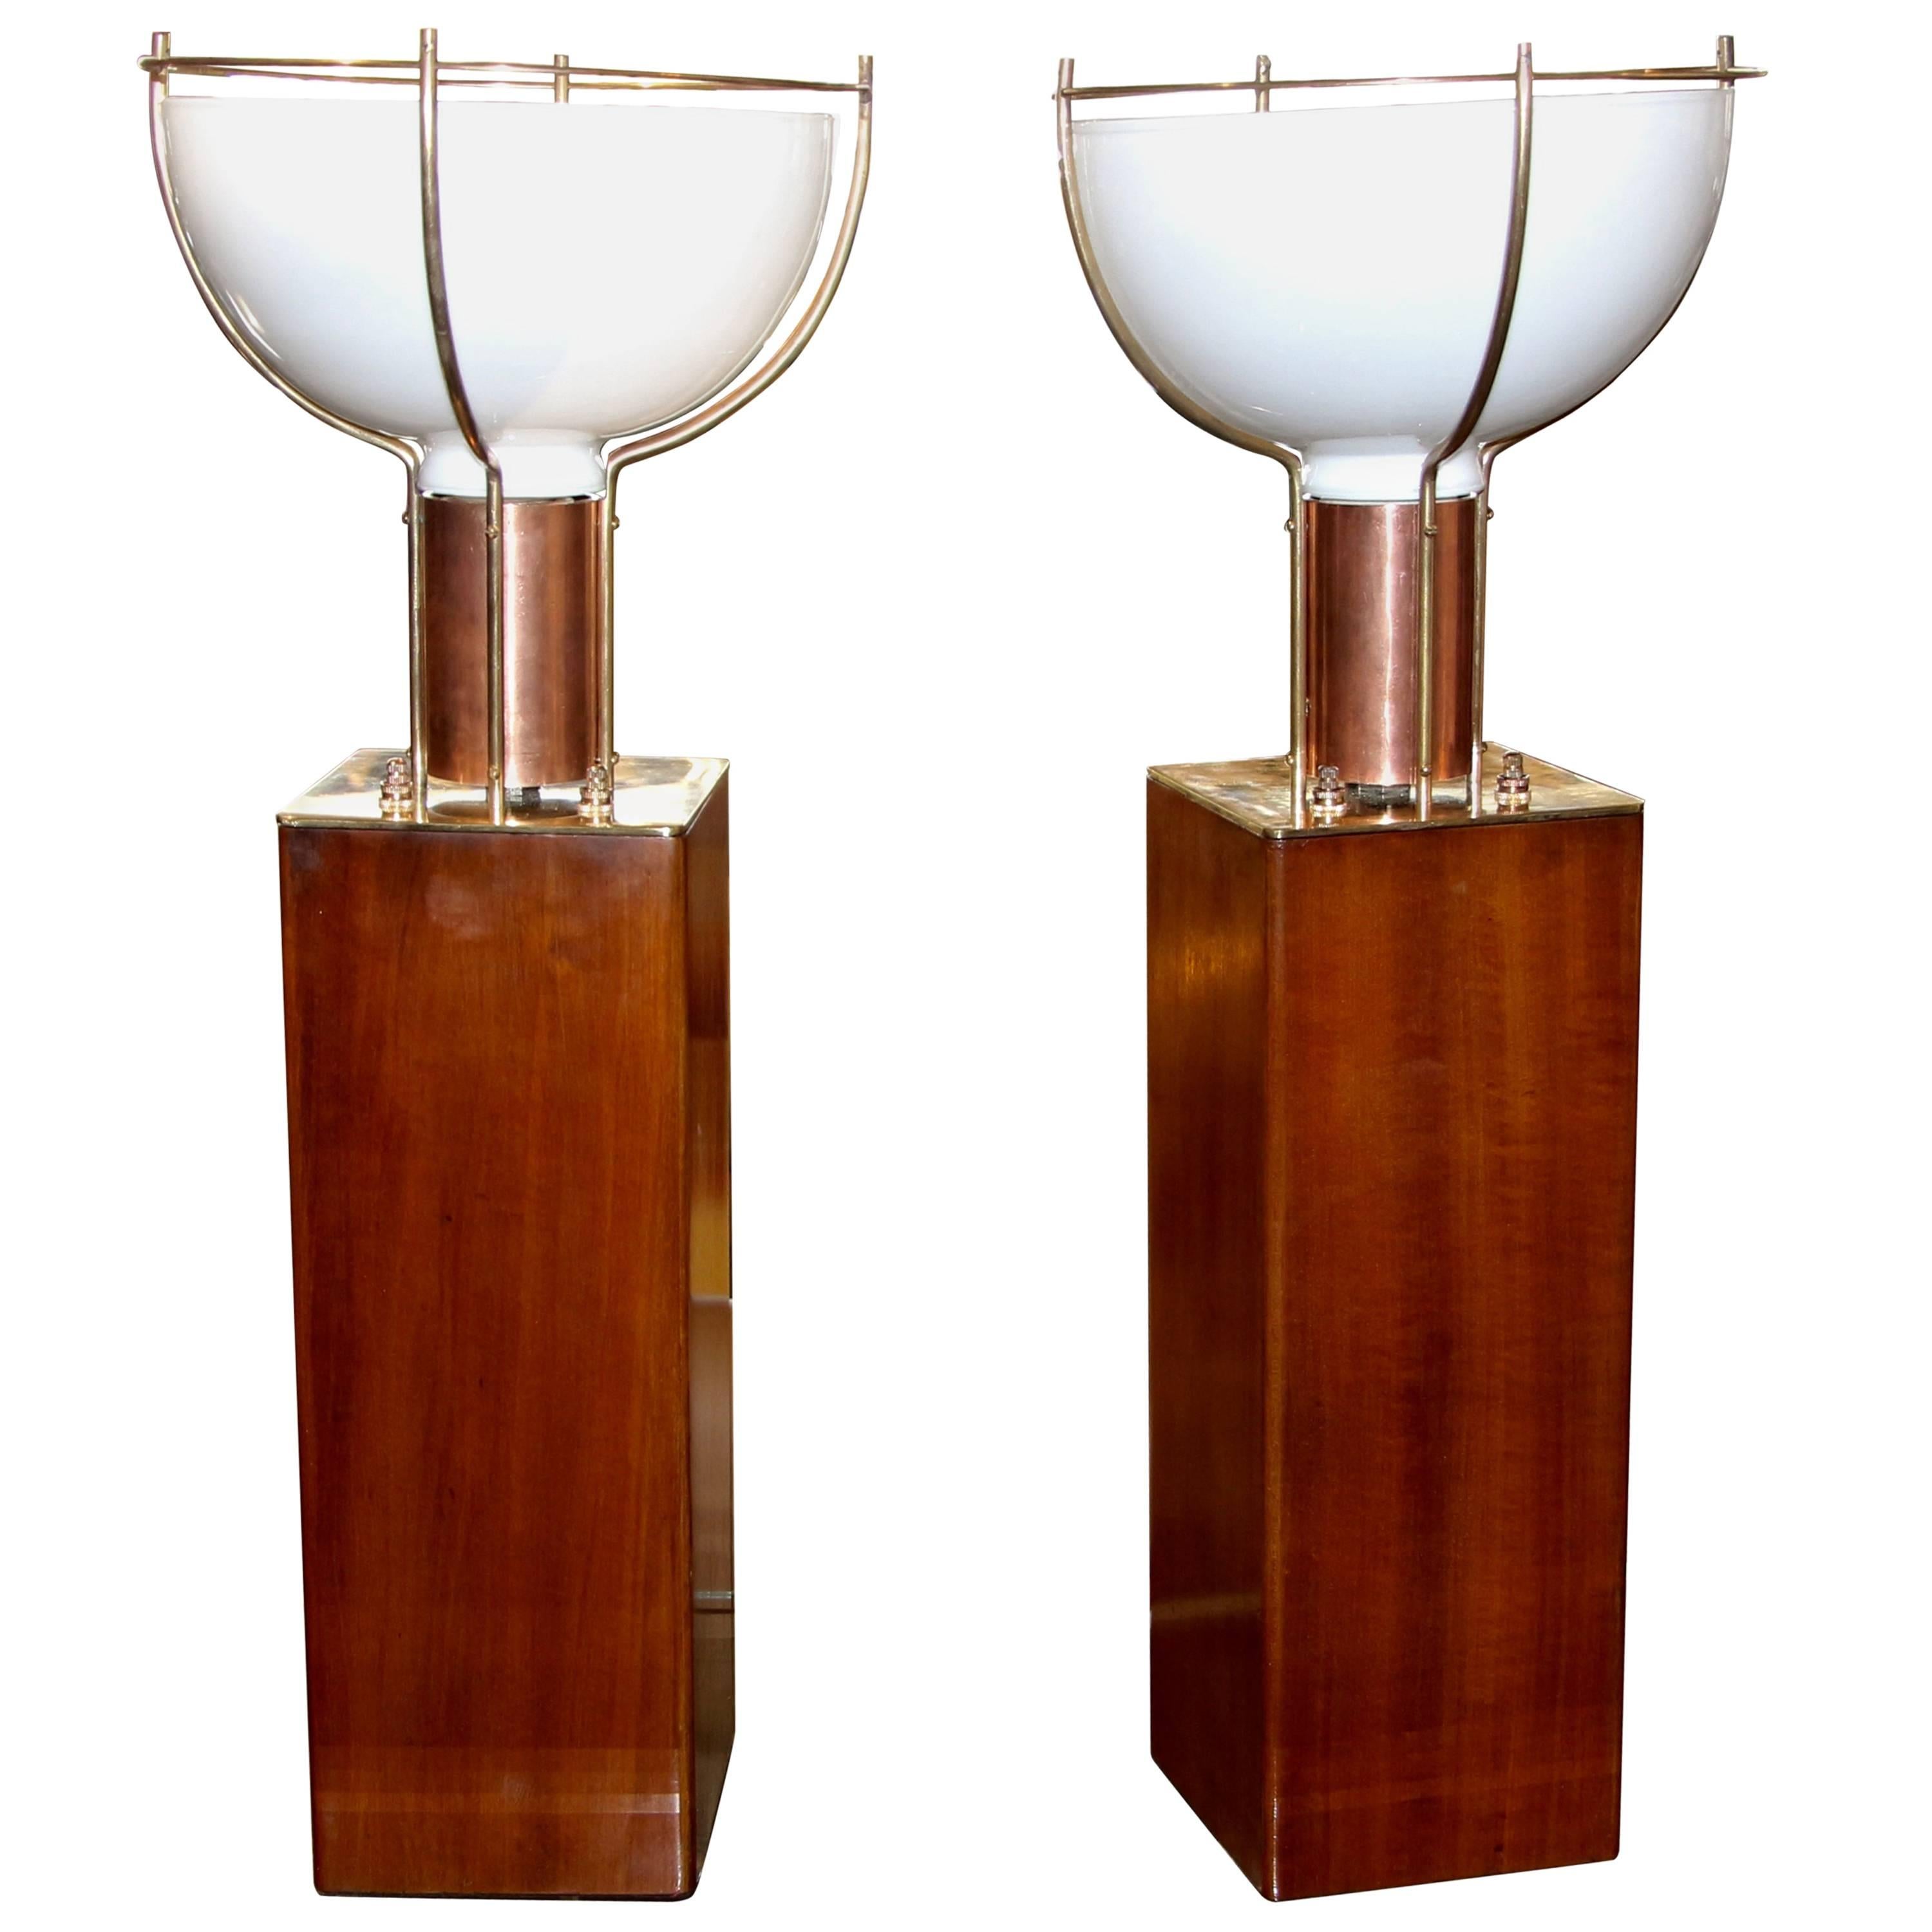 Fabulous Machine Age Lamps in Wood Brass and Copper with Milk Glass Shades